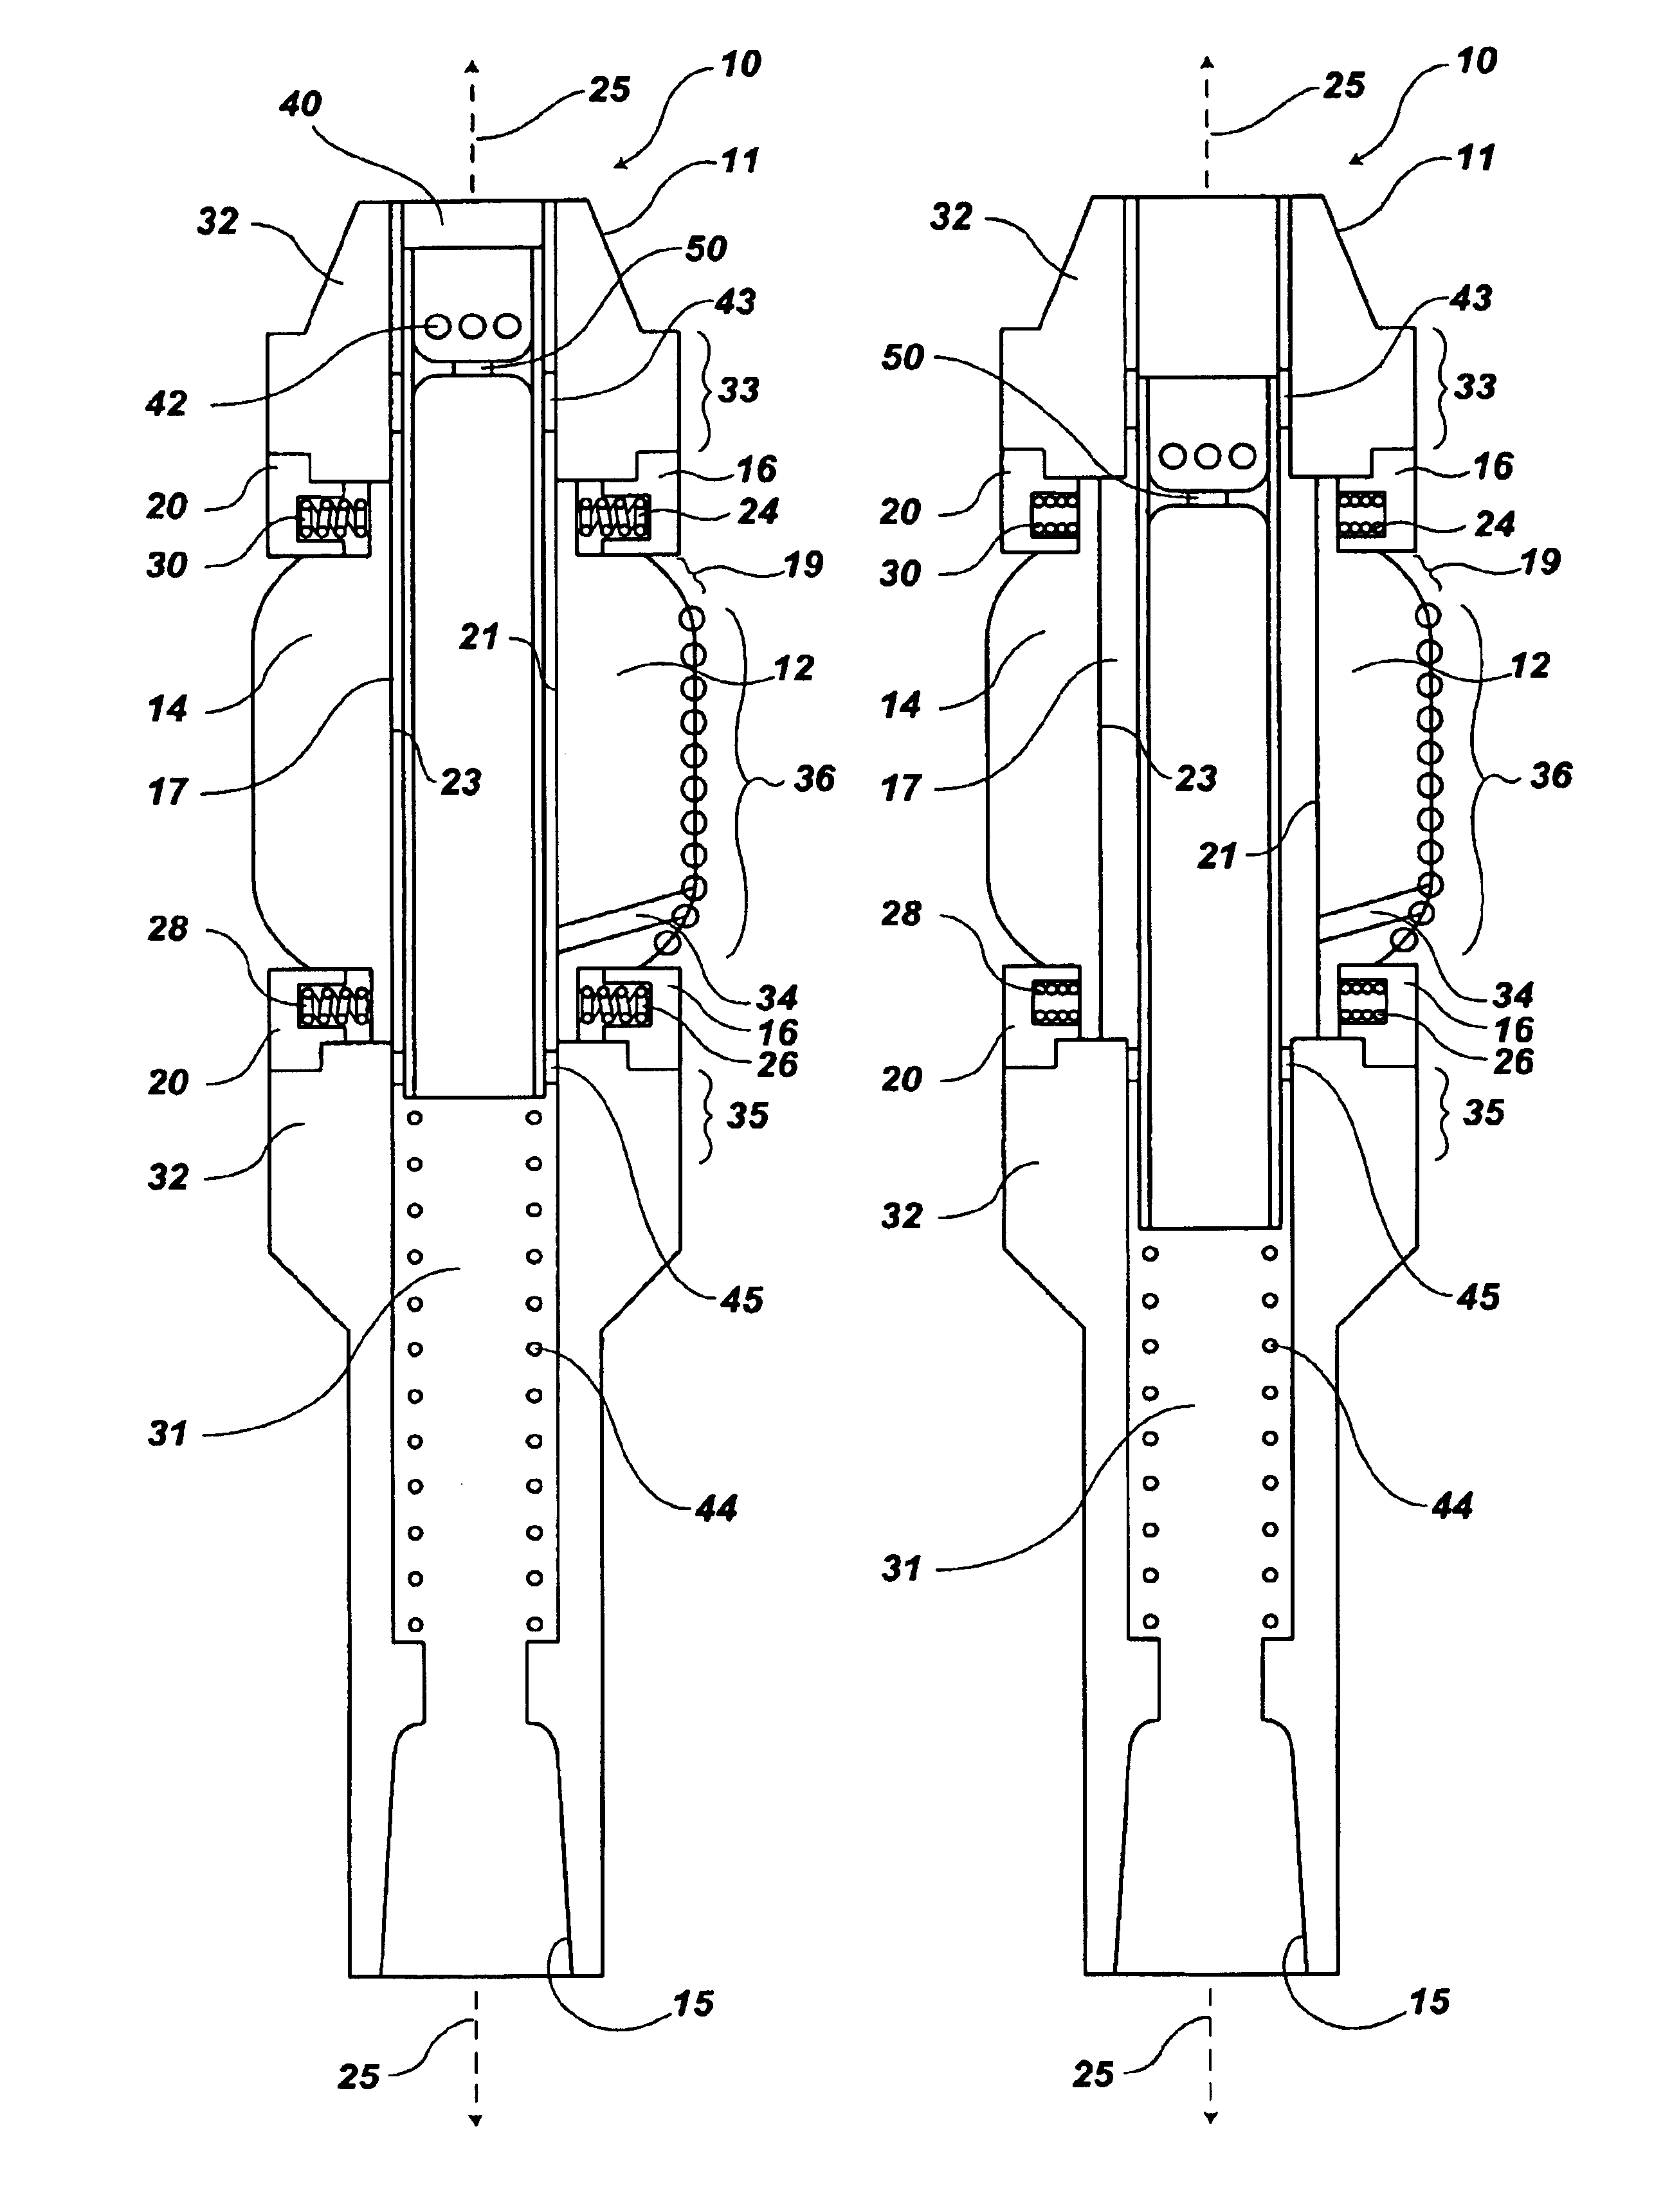 Expandable reamer apparatus for enlarging boreholes while drilling and methods of use